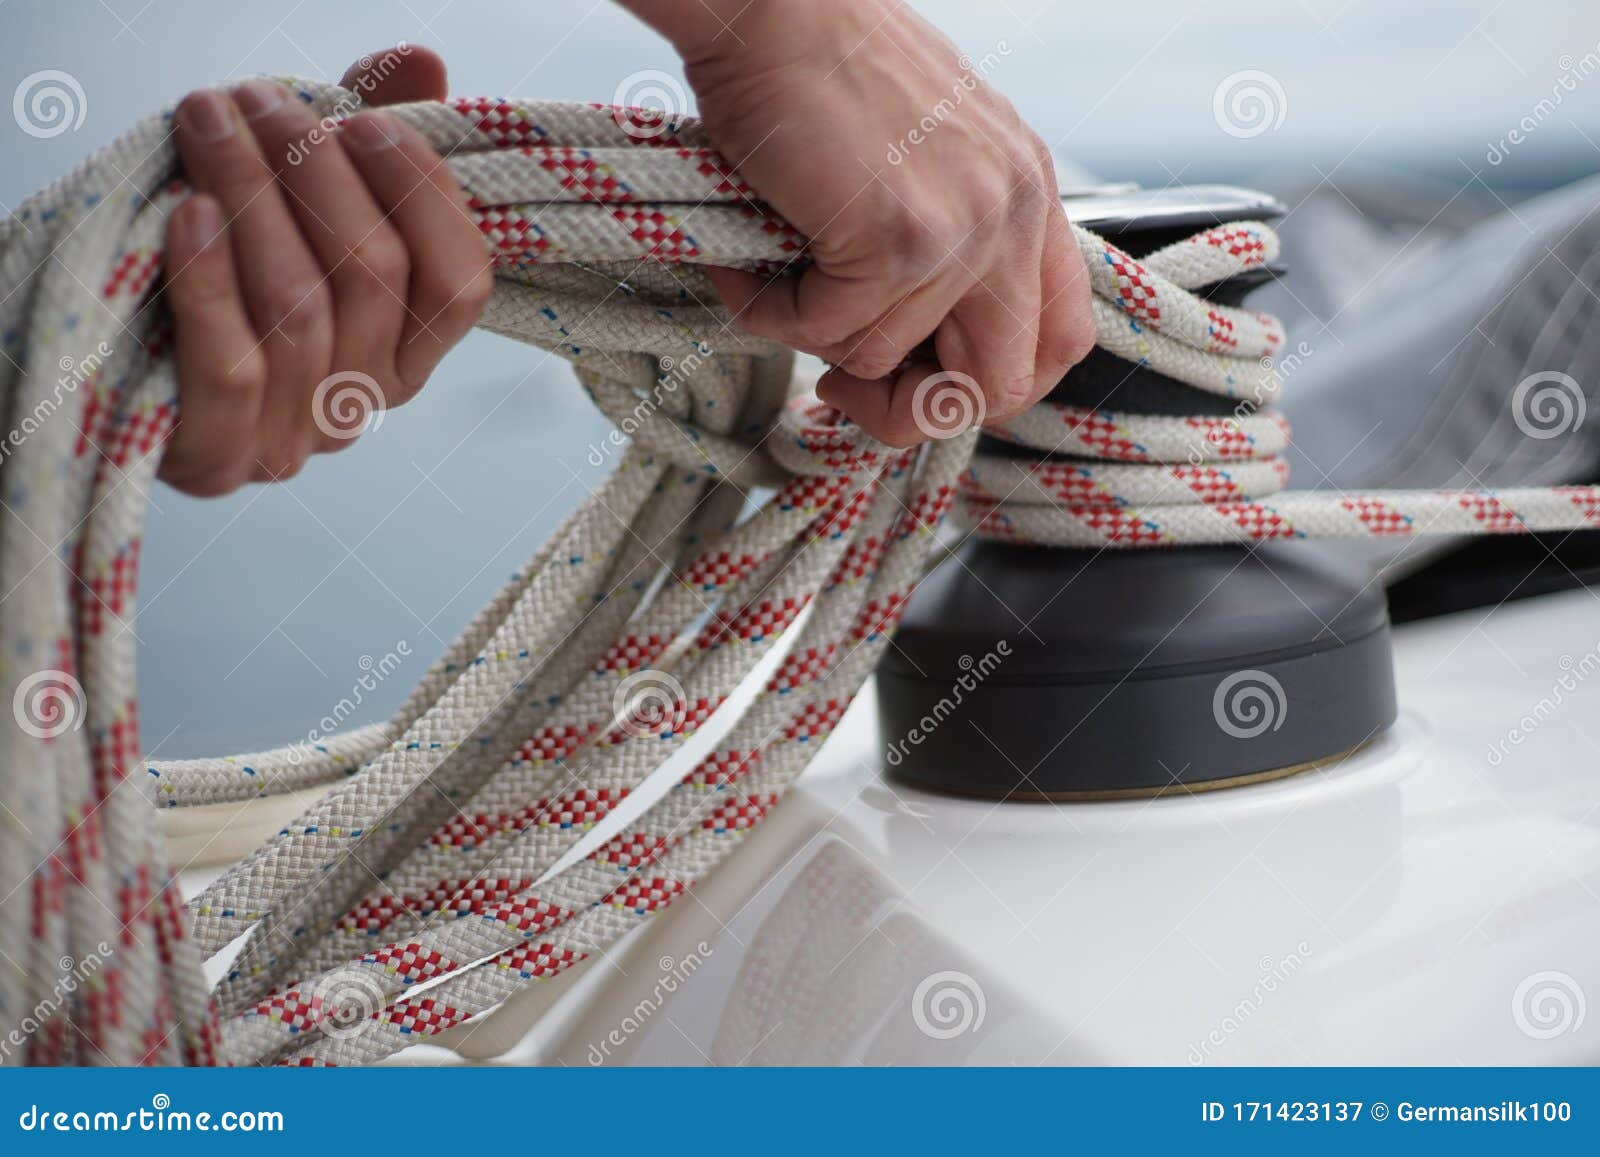 hands of a man coiling up a rope, the halyard on a sailboat